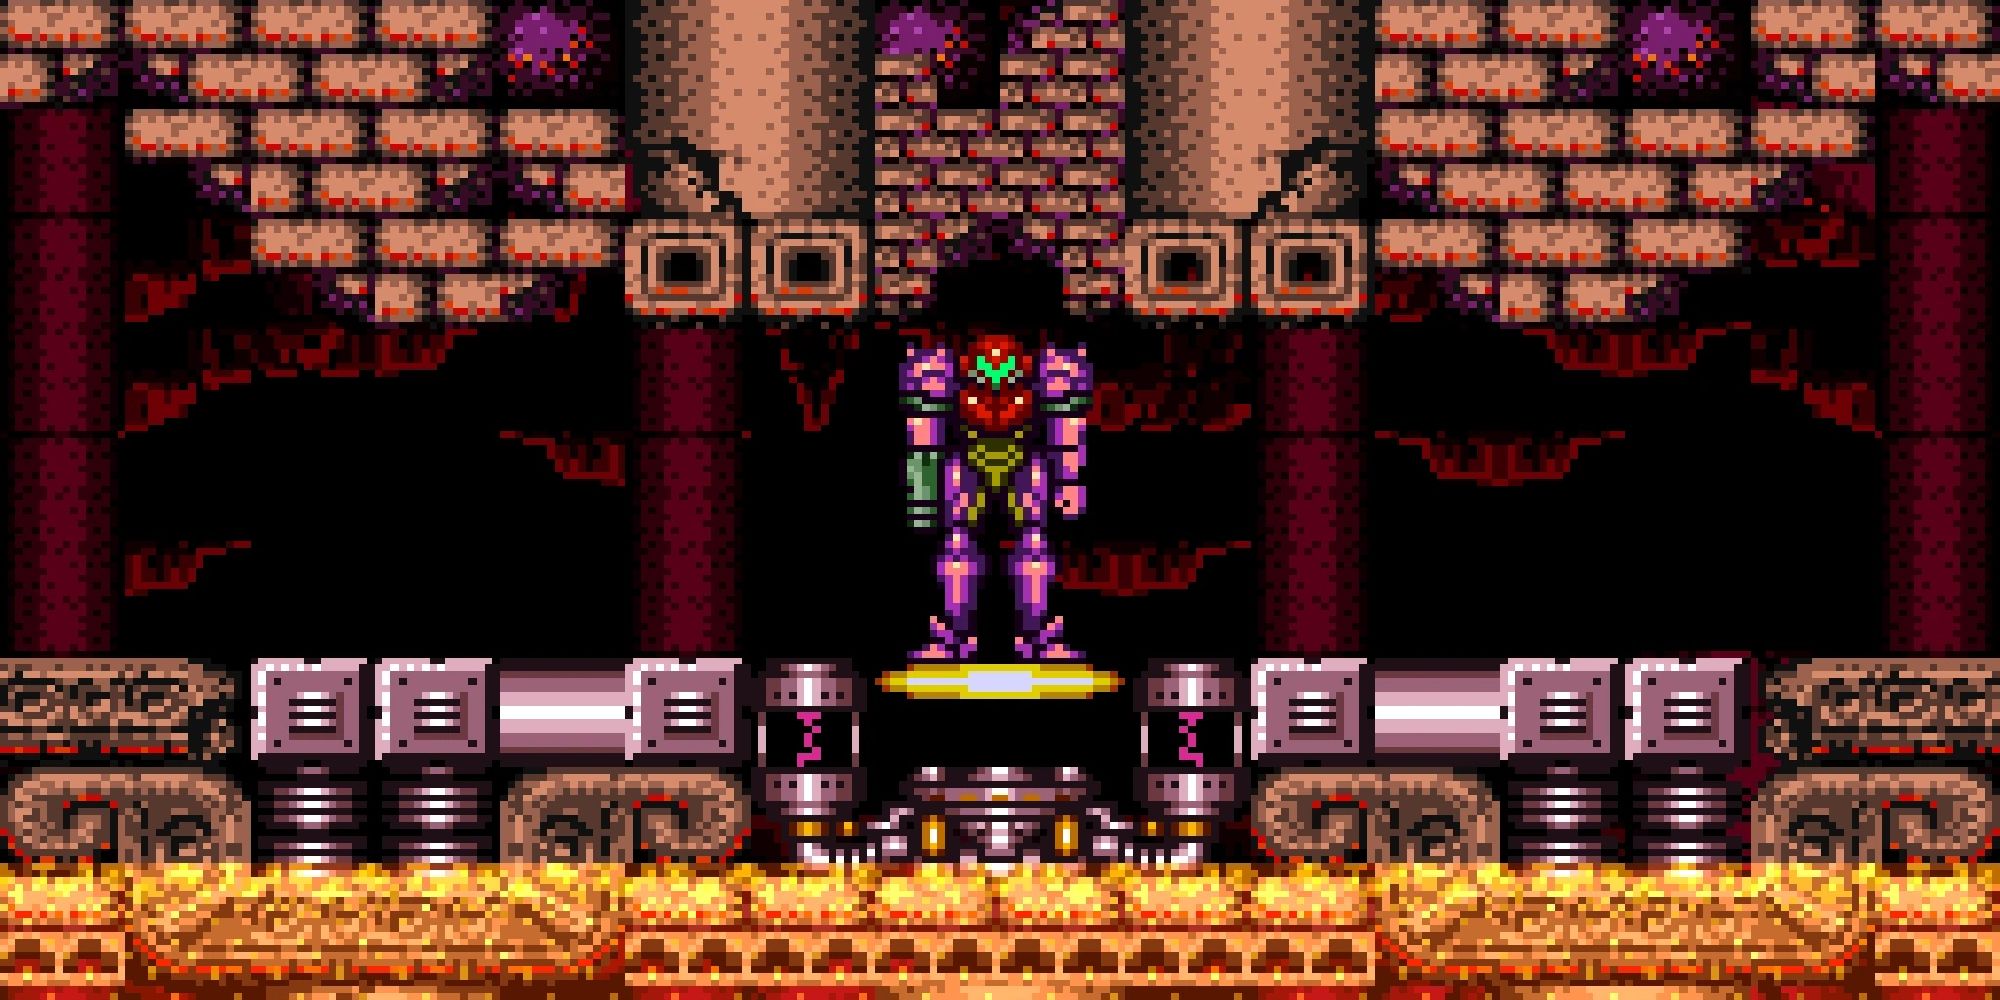 Samus stands in the dilapidated entrance to Lower Norfair in Super Metroid